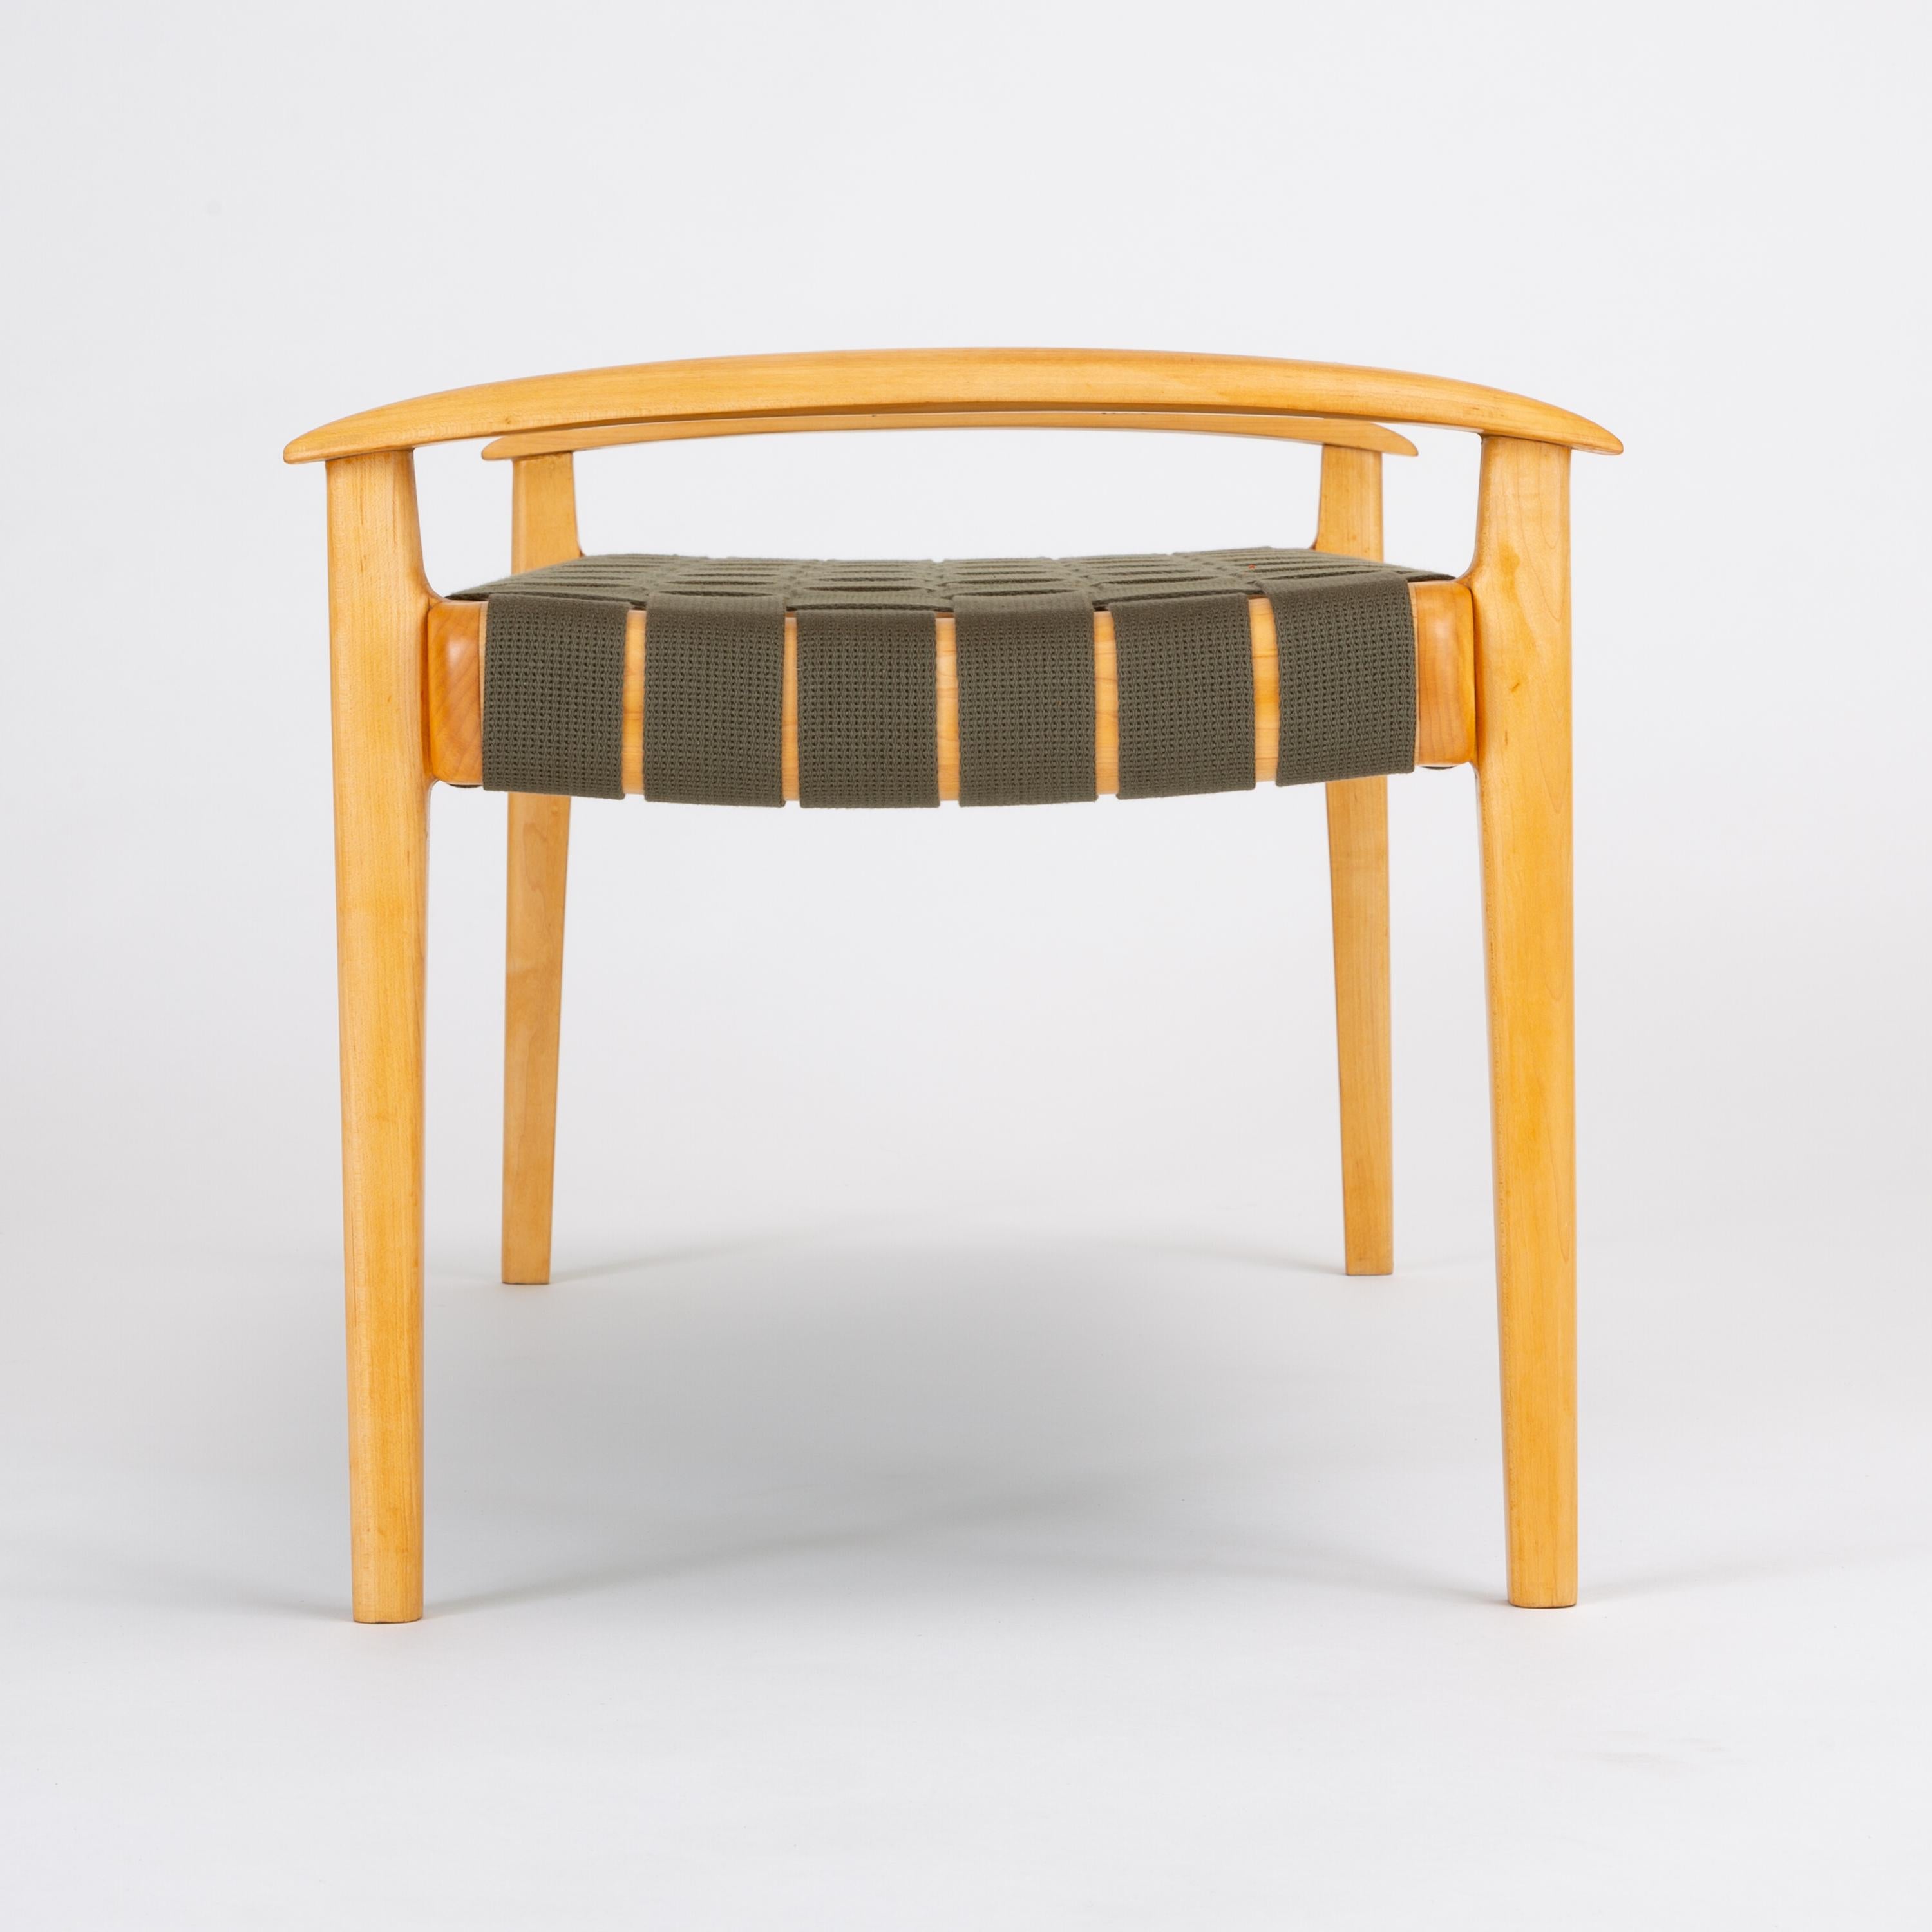 American-Made Maple Bench with Woven Seat by Tom Ghilarducci 2